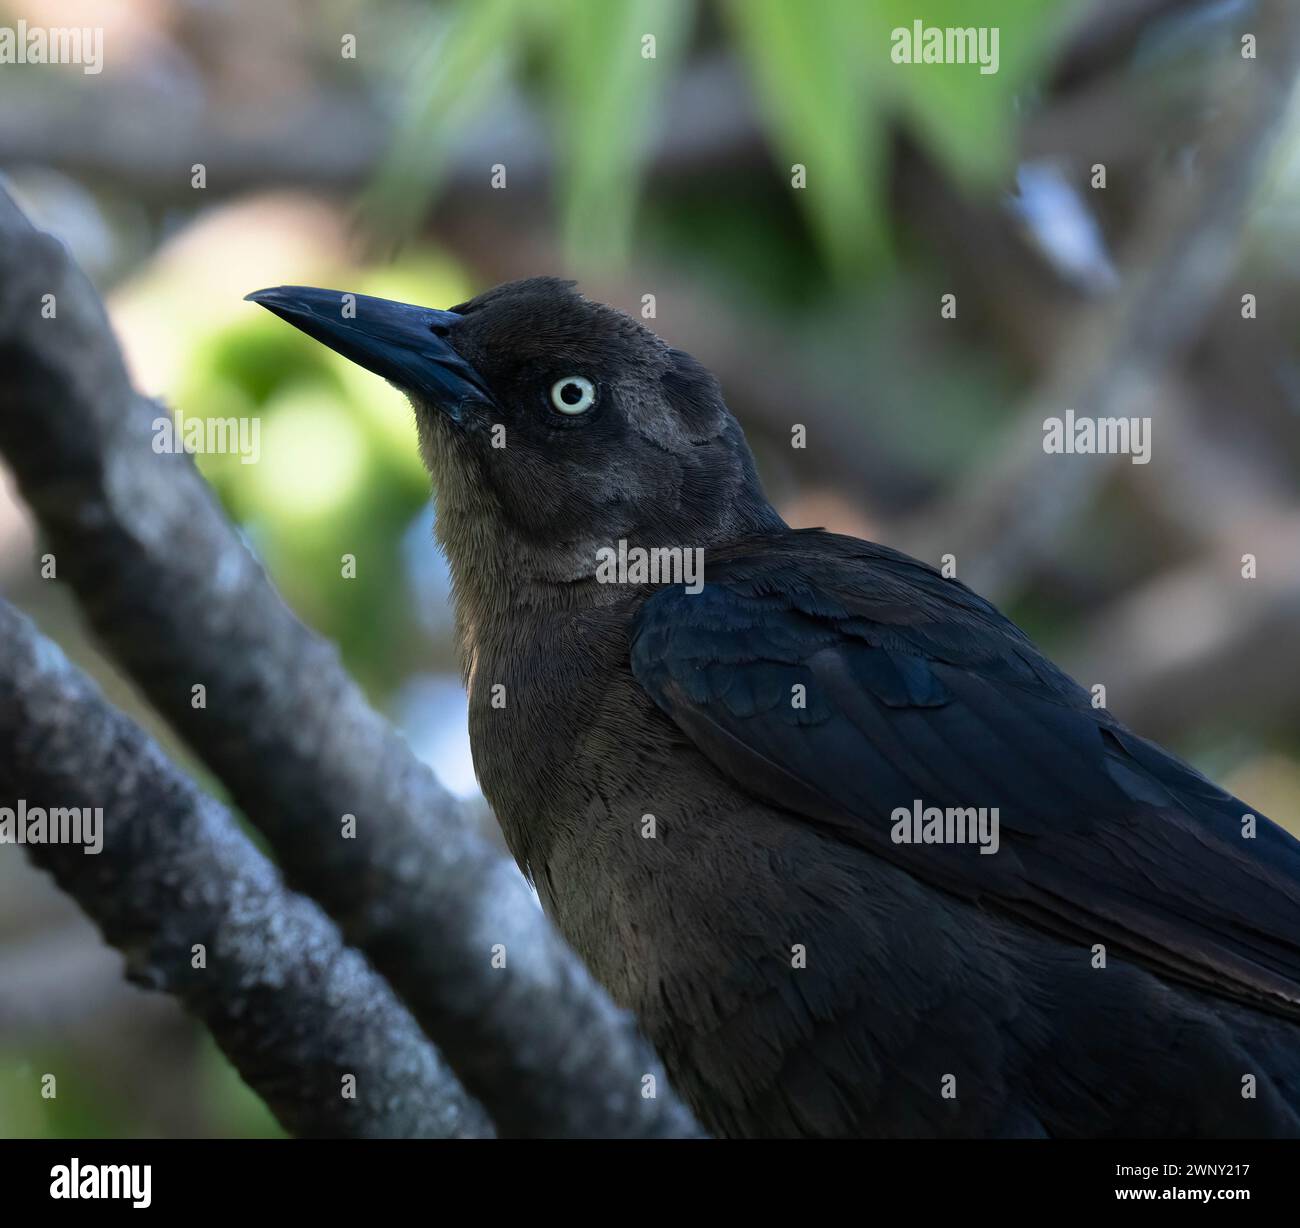 Closeup of face of a molting Great-tailed Grackle in Liberia Costa Rica Stock Photo